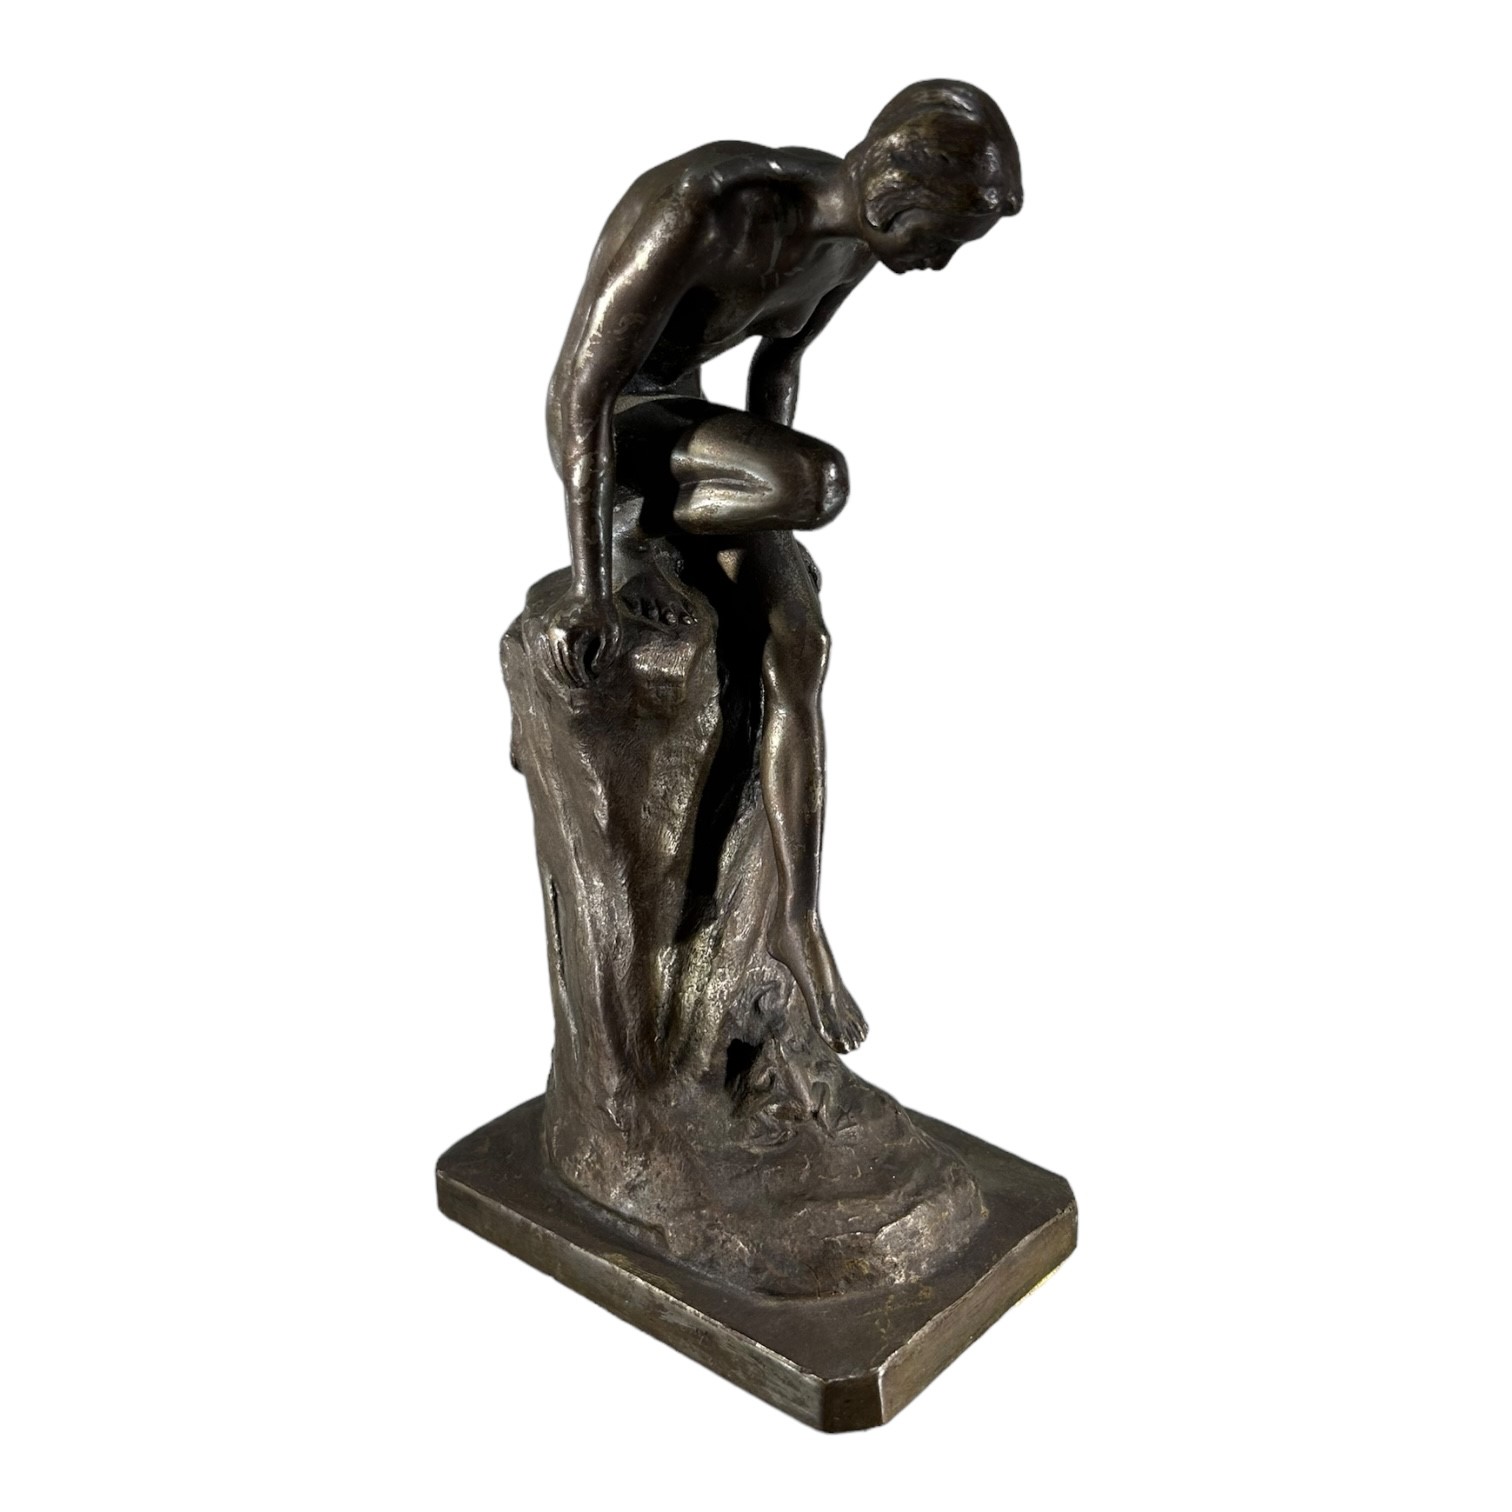 A 20TH CENTURY BRONZE FIGURE OF A NUDE FEMALE BATHER Modelled on stylised plinth with frog and - Image 2 of 3